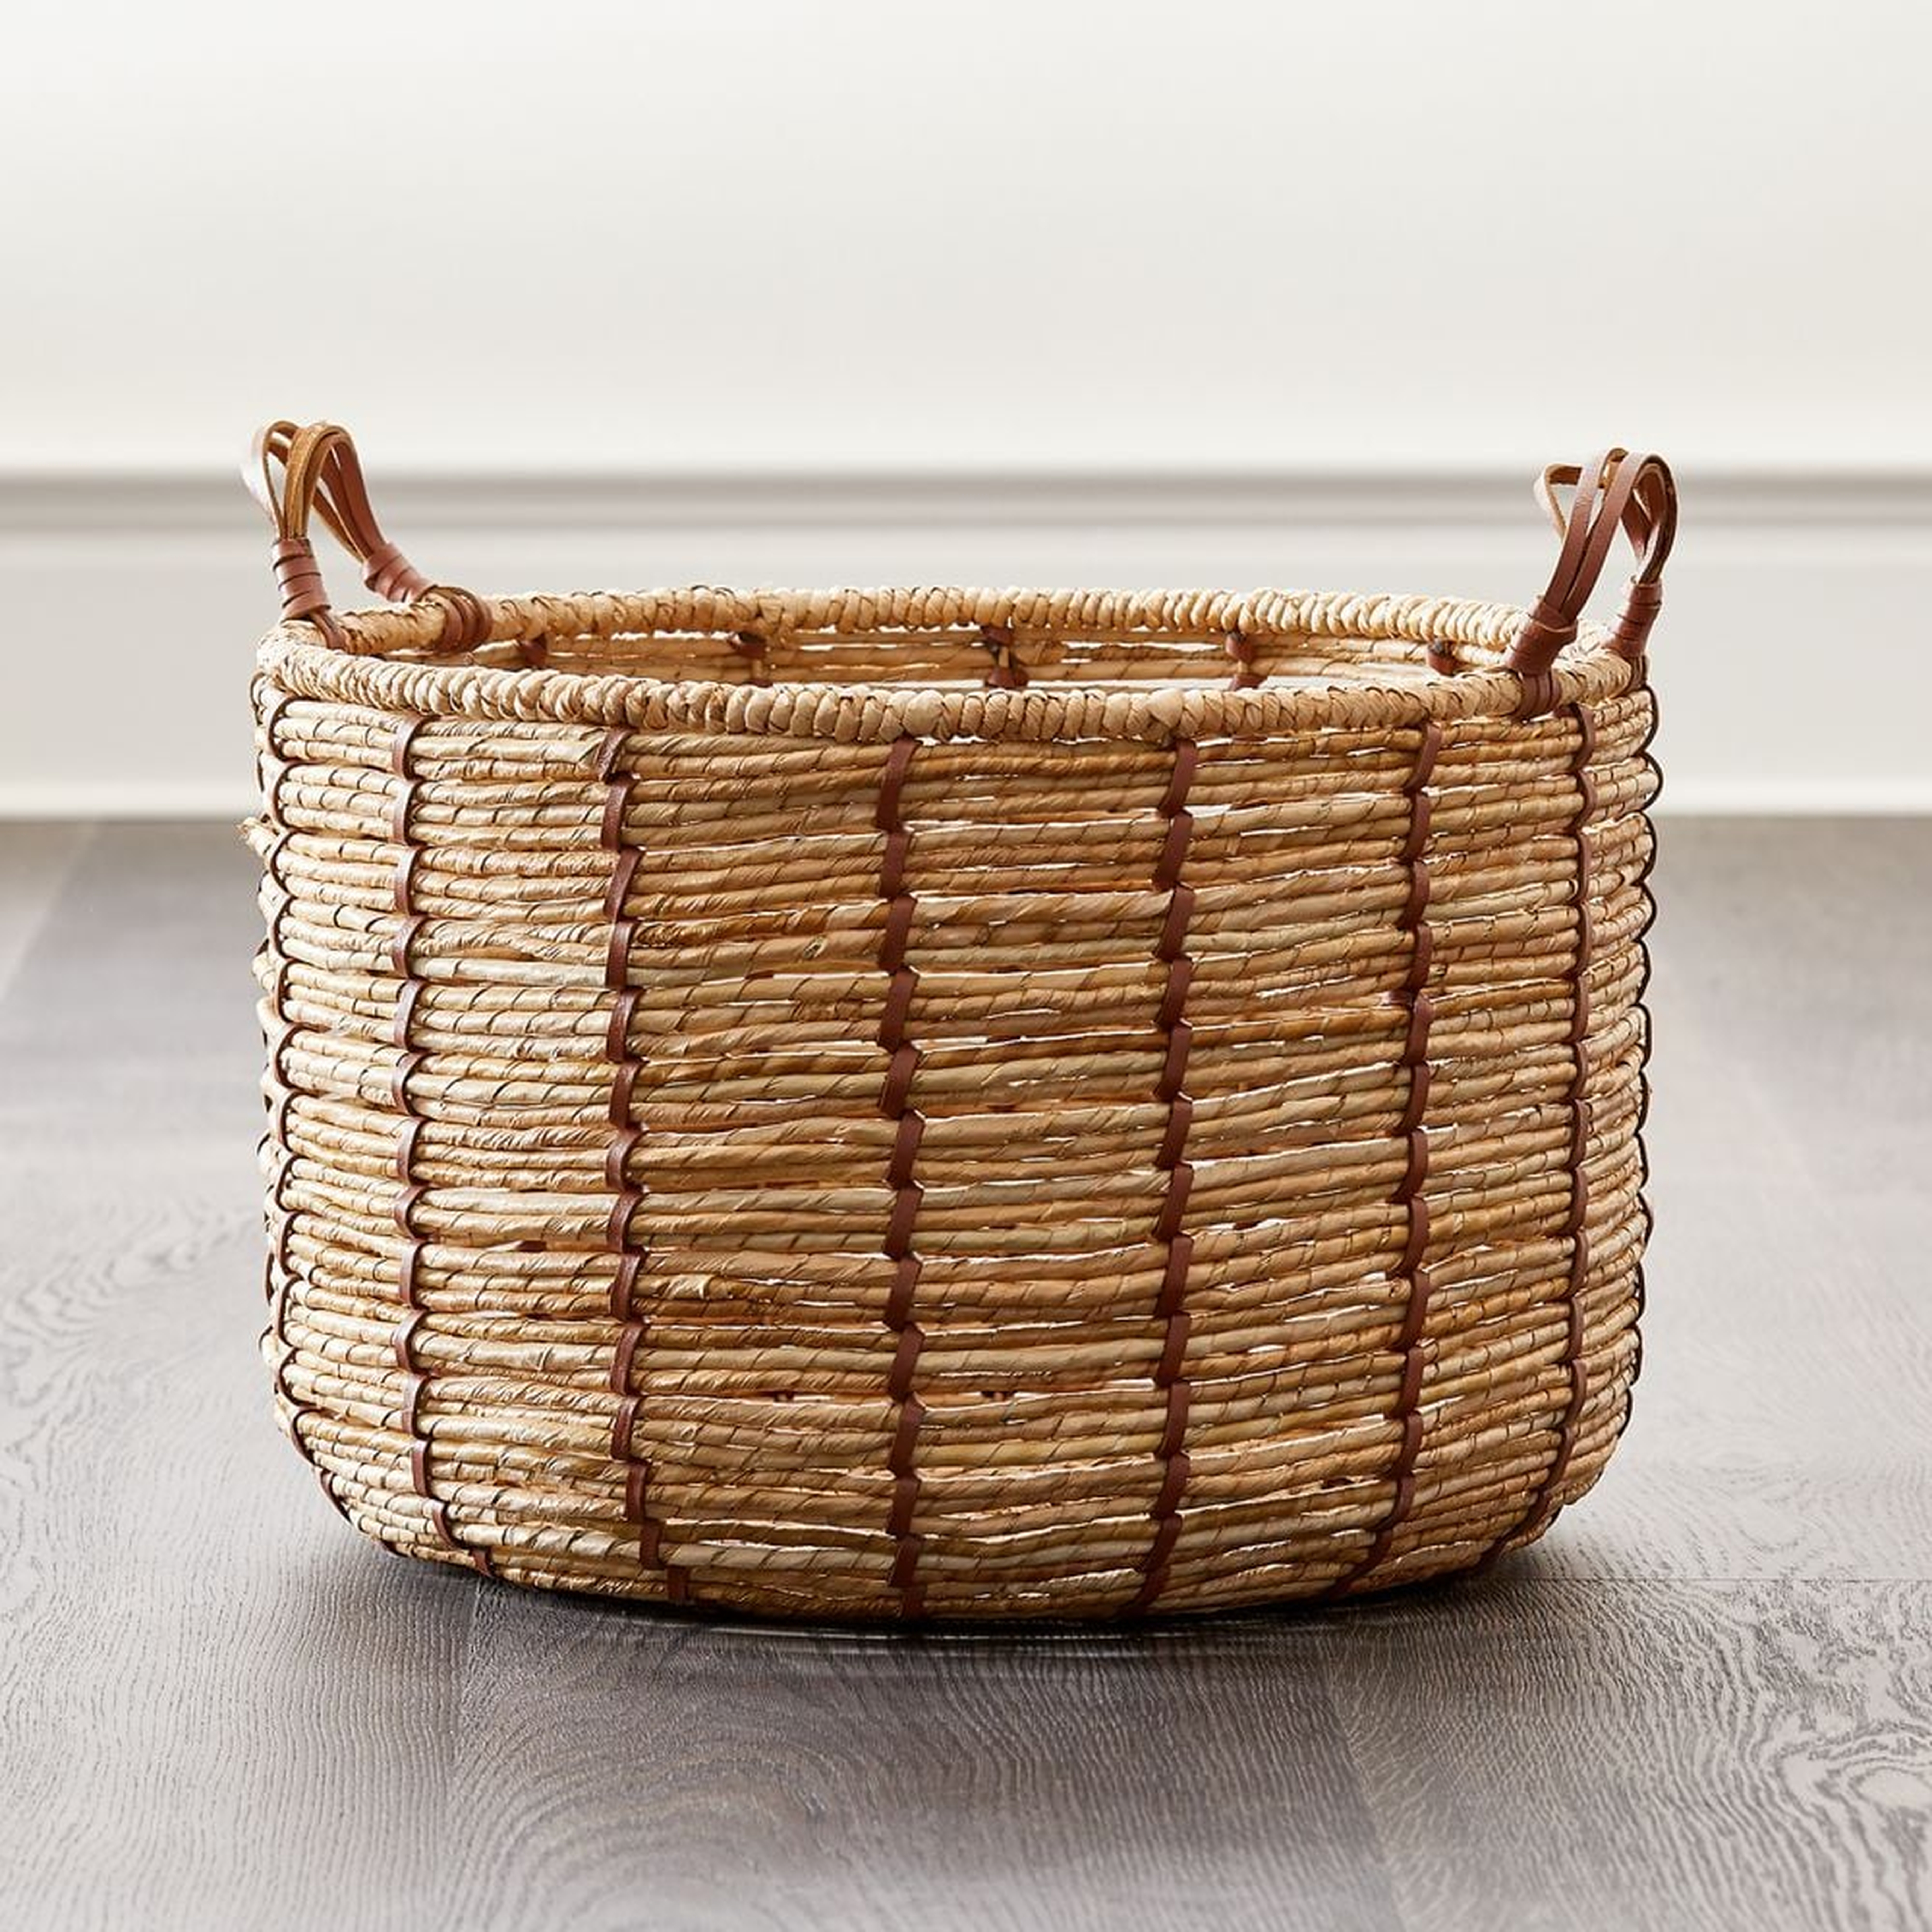 Emory Small Cognac Leather Handle Basket - Crate and Barrel